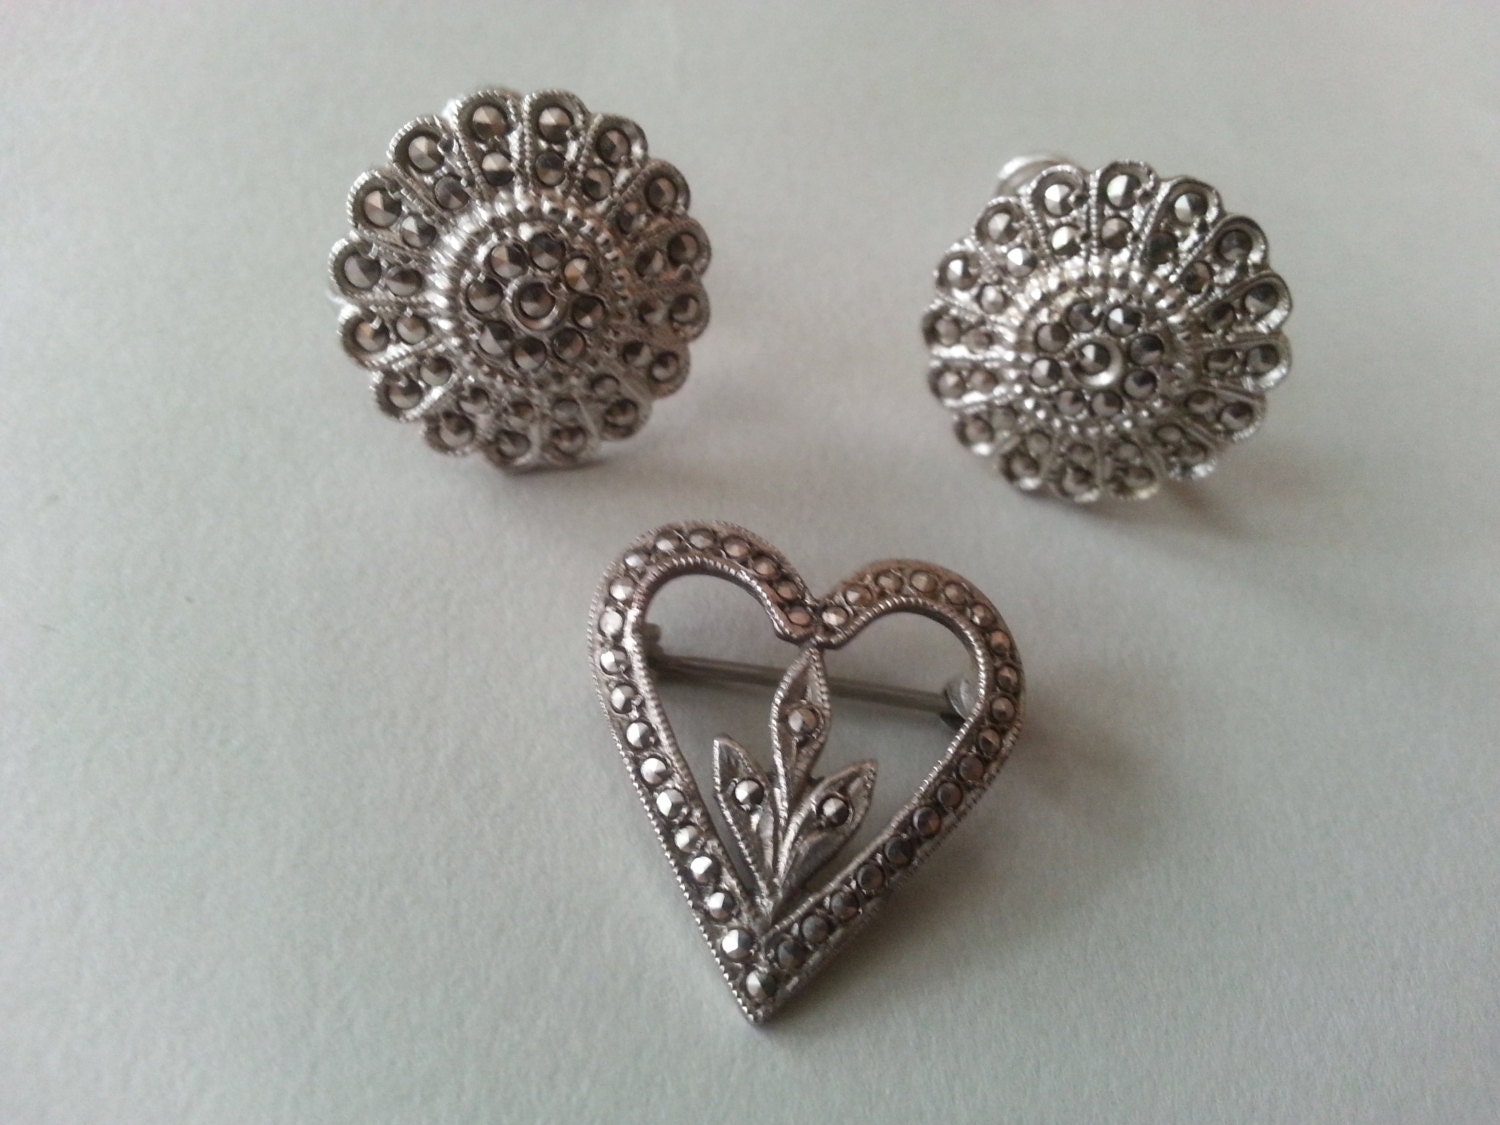 Vintage Marcasite Floral Earrings and Sterling Silver Heart Pin Screw Backs Brooch Silver Tone - CafeChaCha